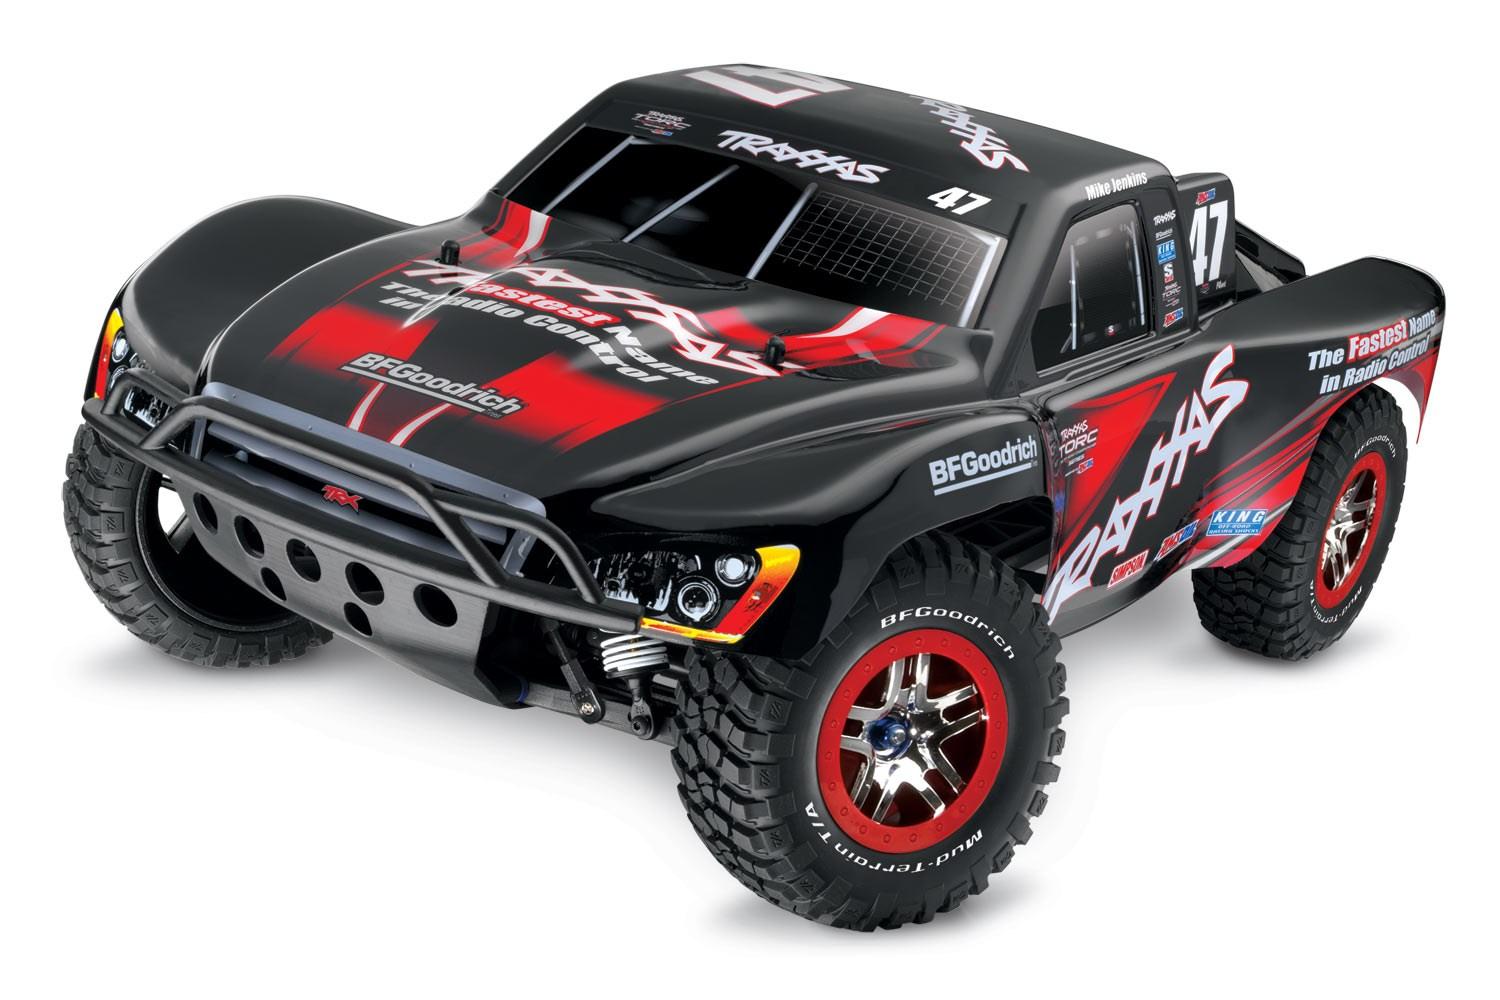 Foto Traxxas 6807 Slash Ultimate VXL Brushless 4WD 2.4GHz RTR modelismo coches rc (Negro)